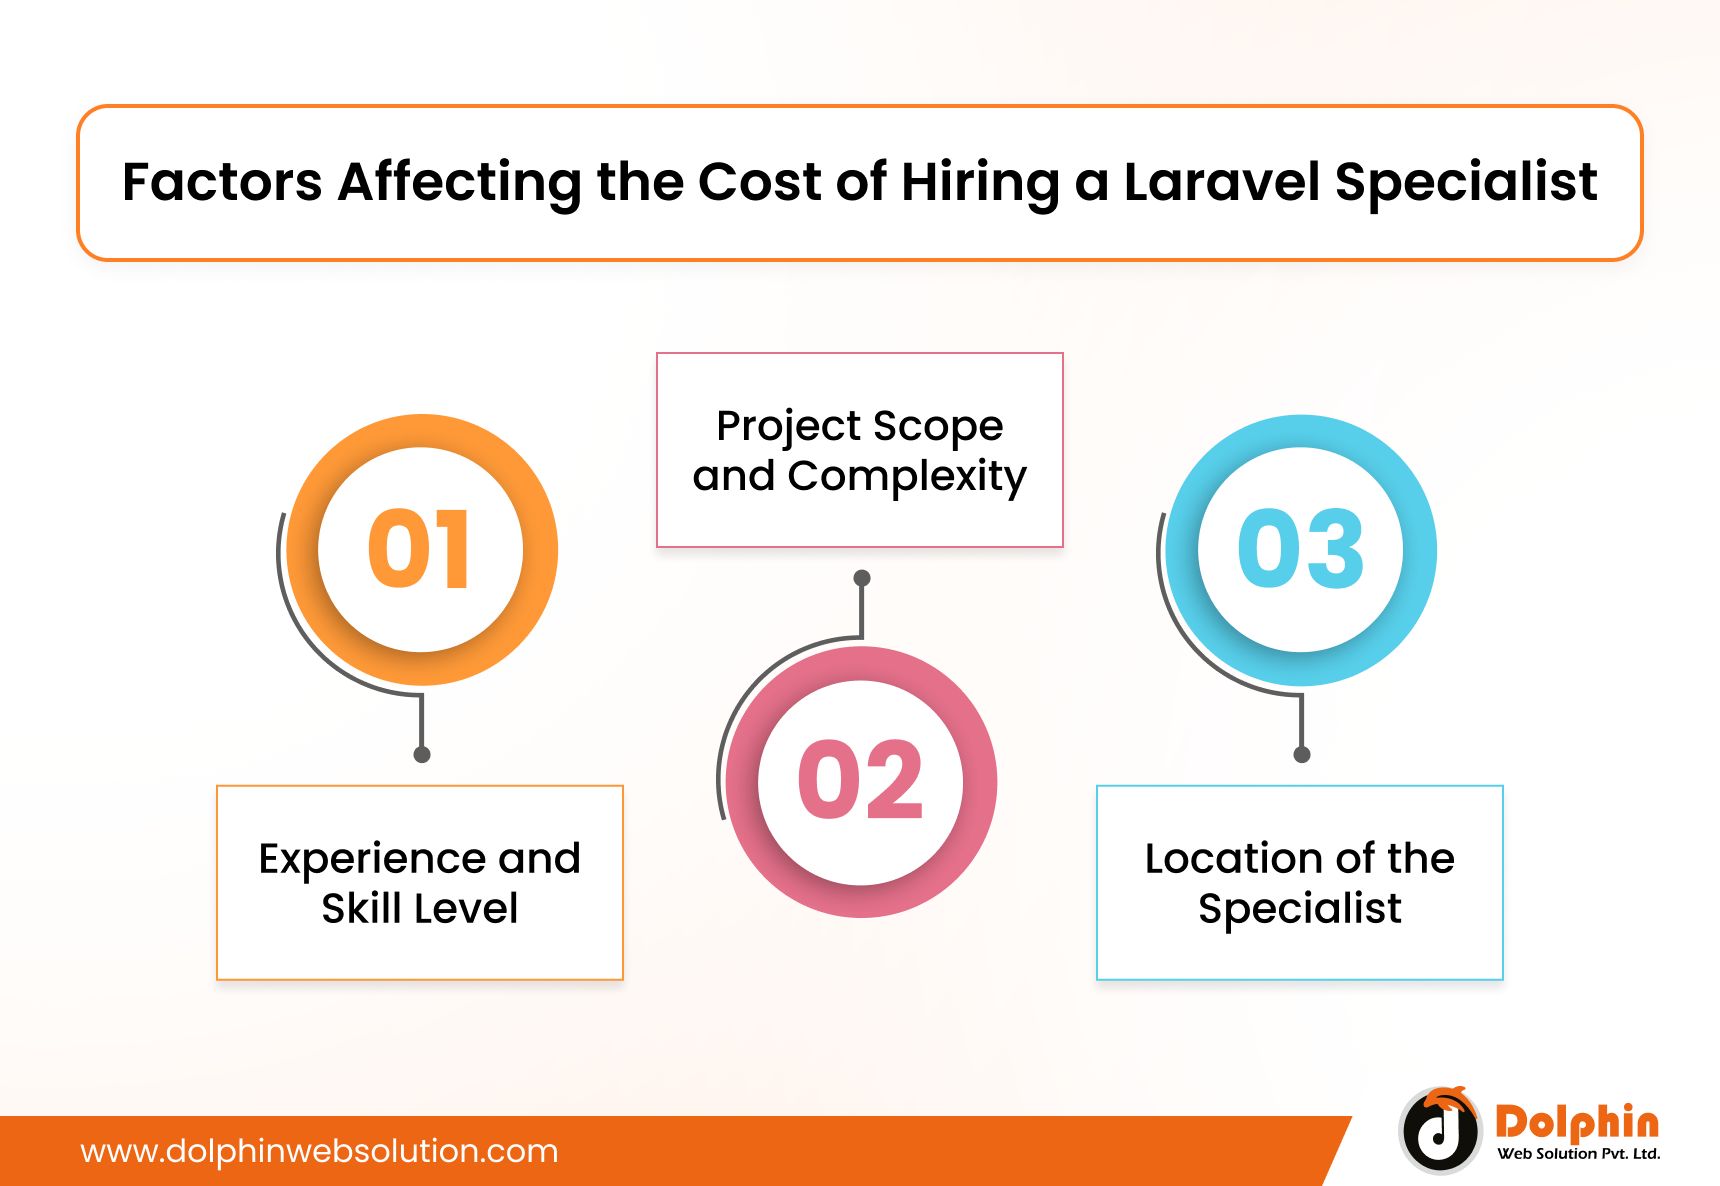 Factors Affecting the Cost of Hiring a Laravel Specialist